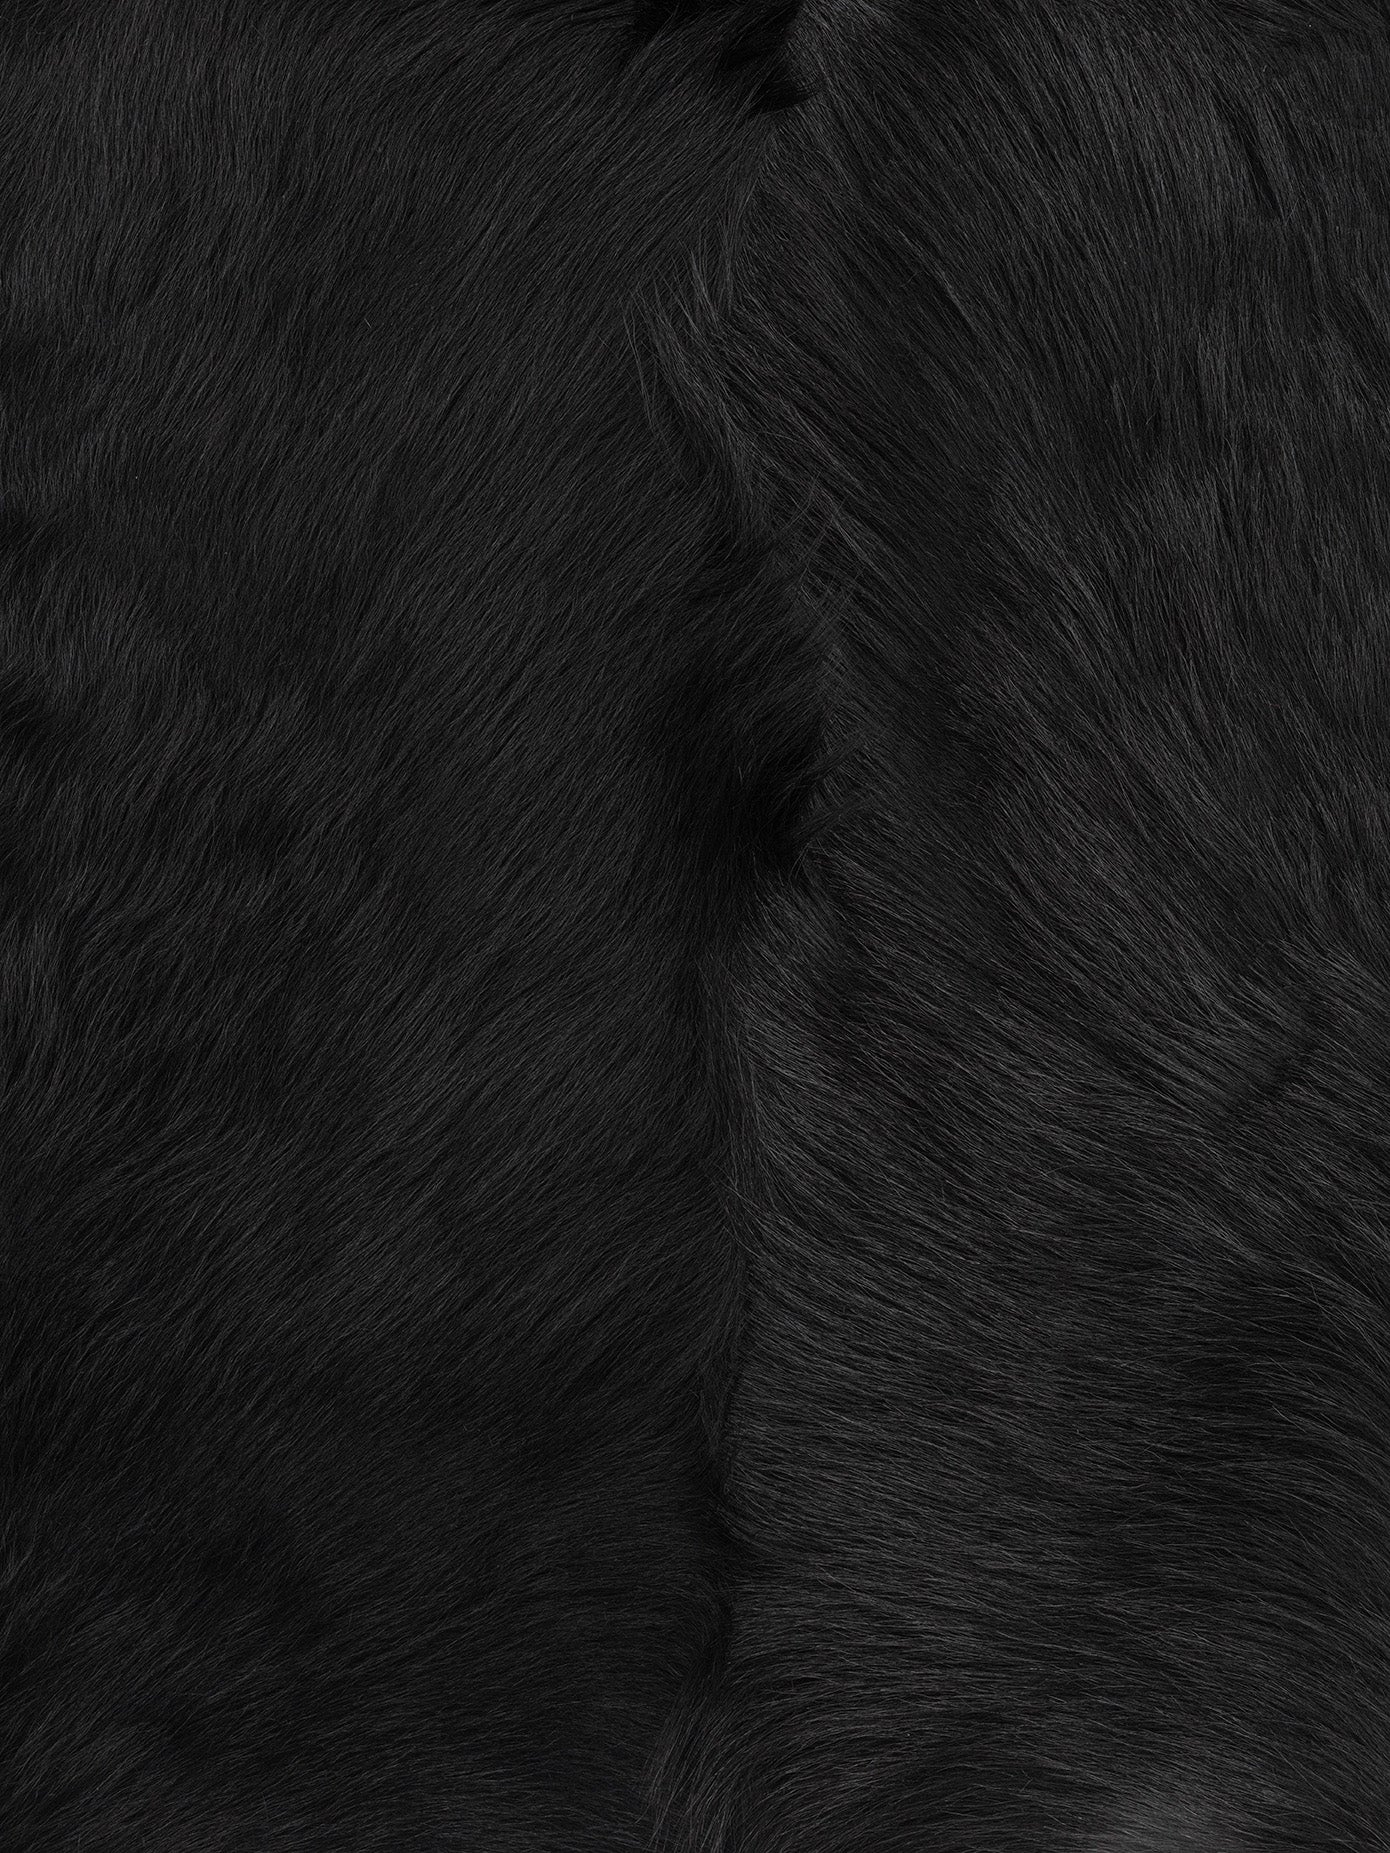 Black Natural Hairy Leather Carpet